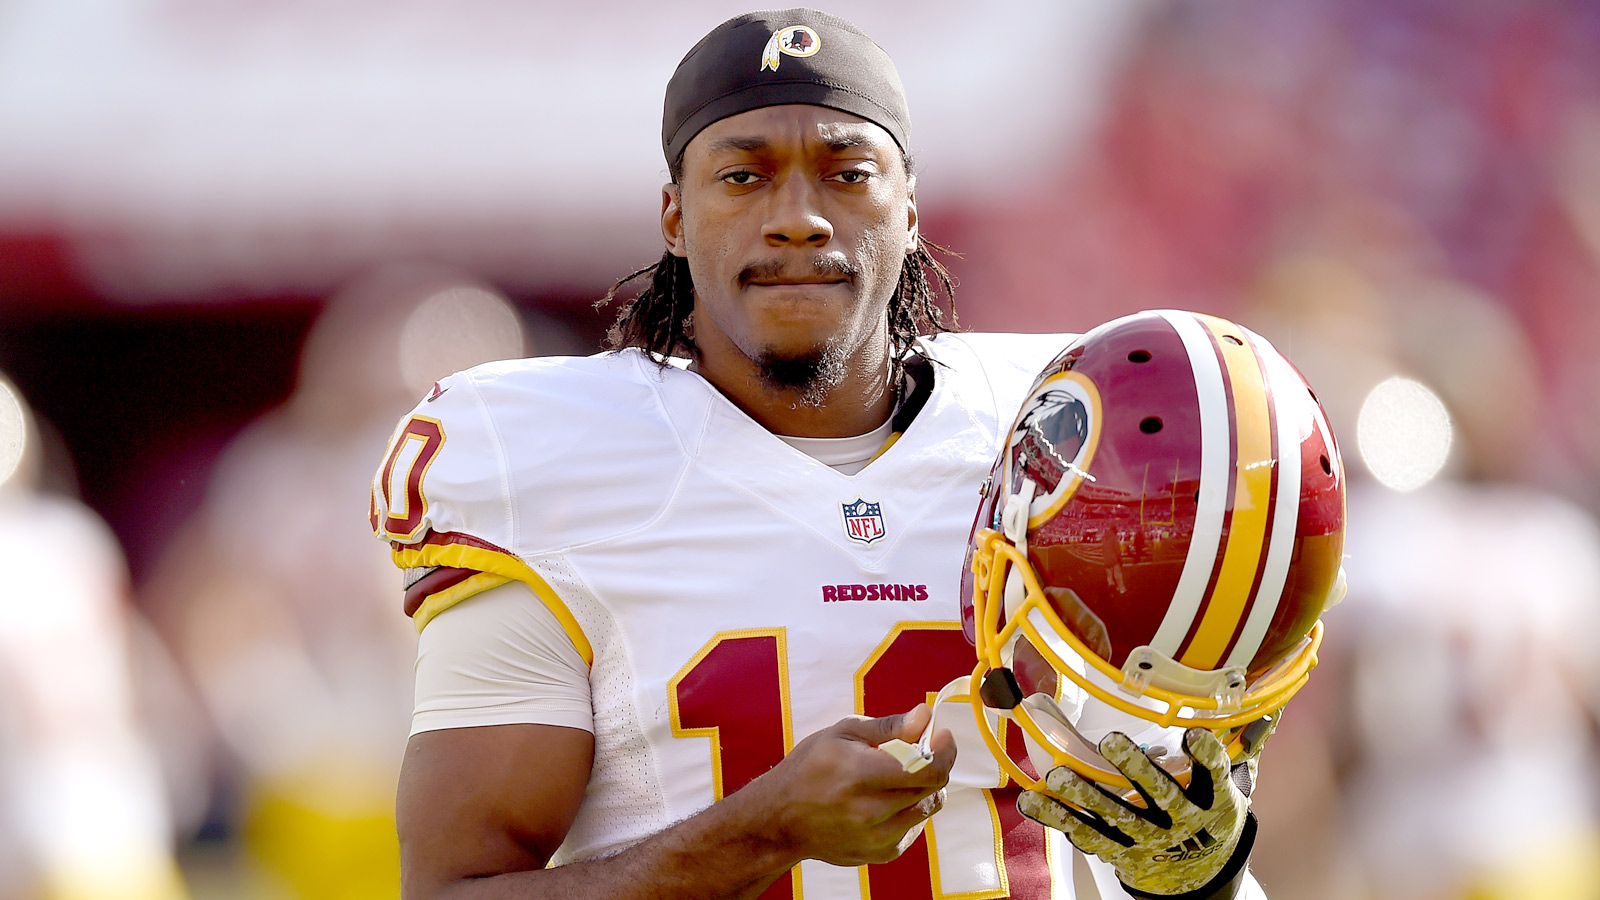 Redskins Will Pick-up 2016 Option on Robert Griffin III